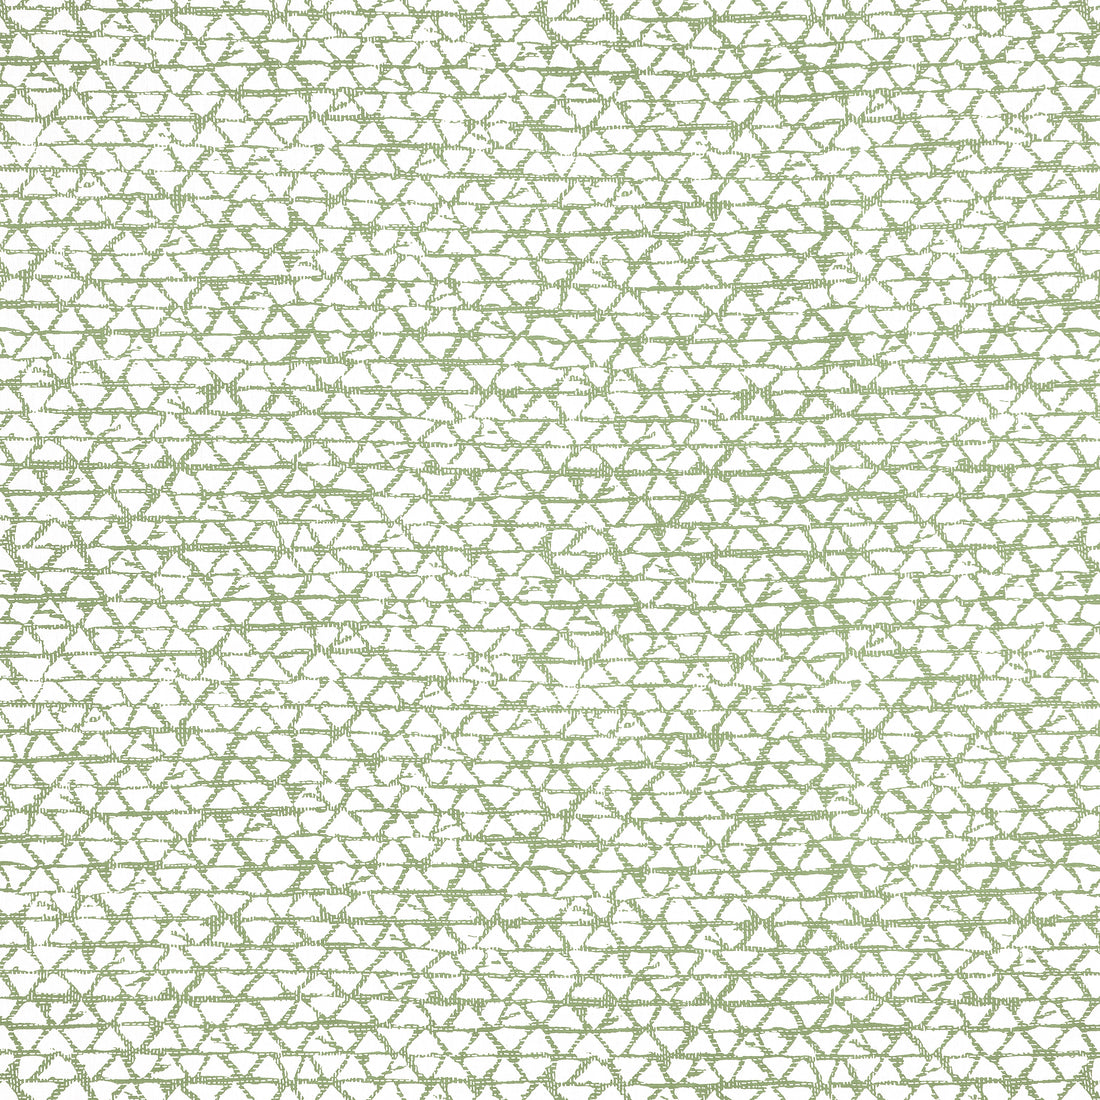 Maluku fabric in spruce color - pattern number F981330 - by Thibaut in the Montecito collection